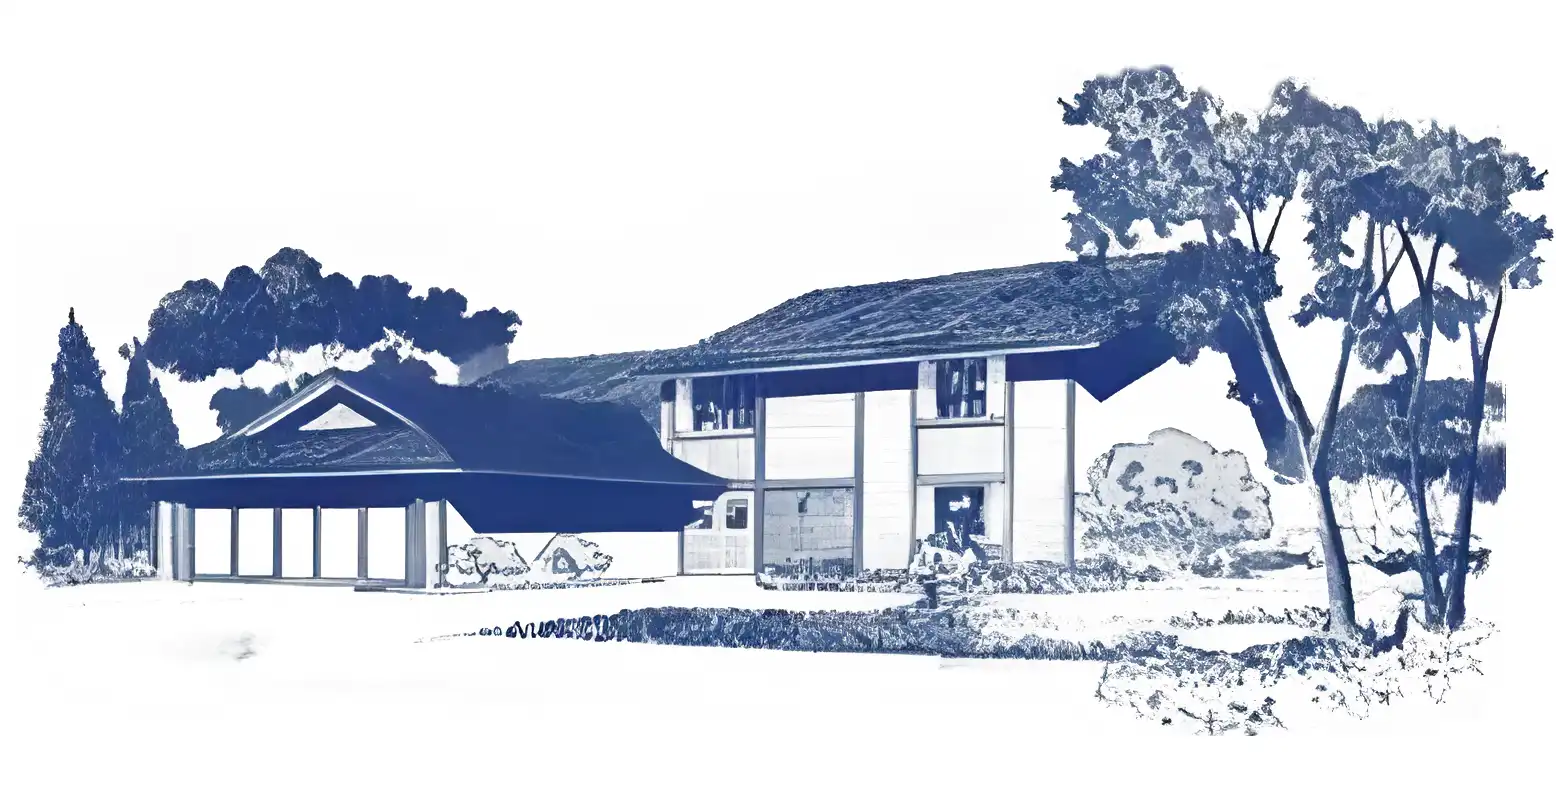 Monochrome rendering of 1960s 2 story house, variant combining dutch gabled garage and gabled main house with rustic half-timber details.